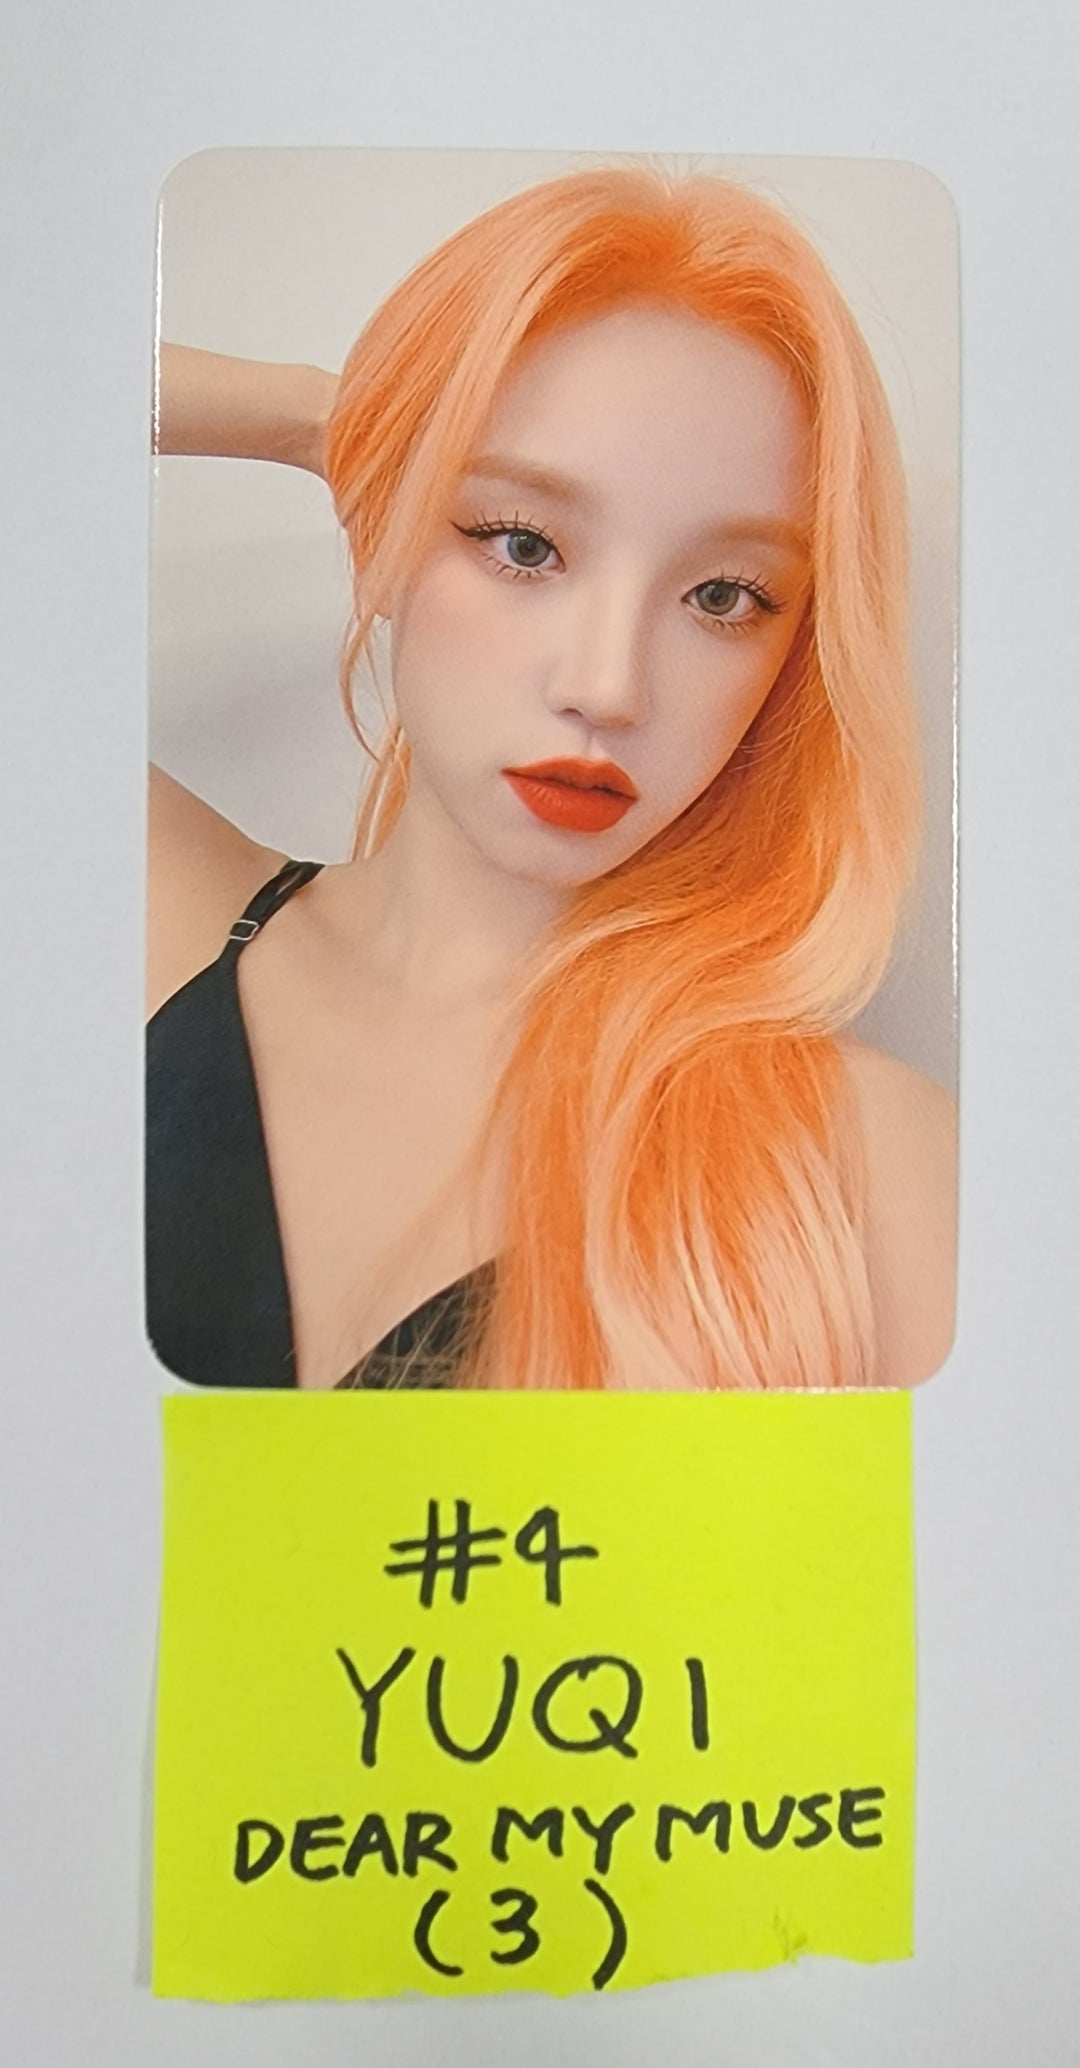 (g) I-DLE "I LOVE" - Dear My Muze Special Event Photocard + Postcard